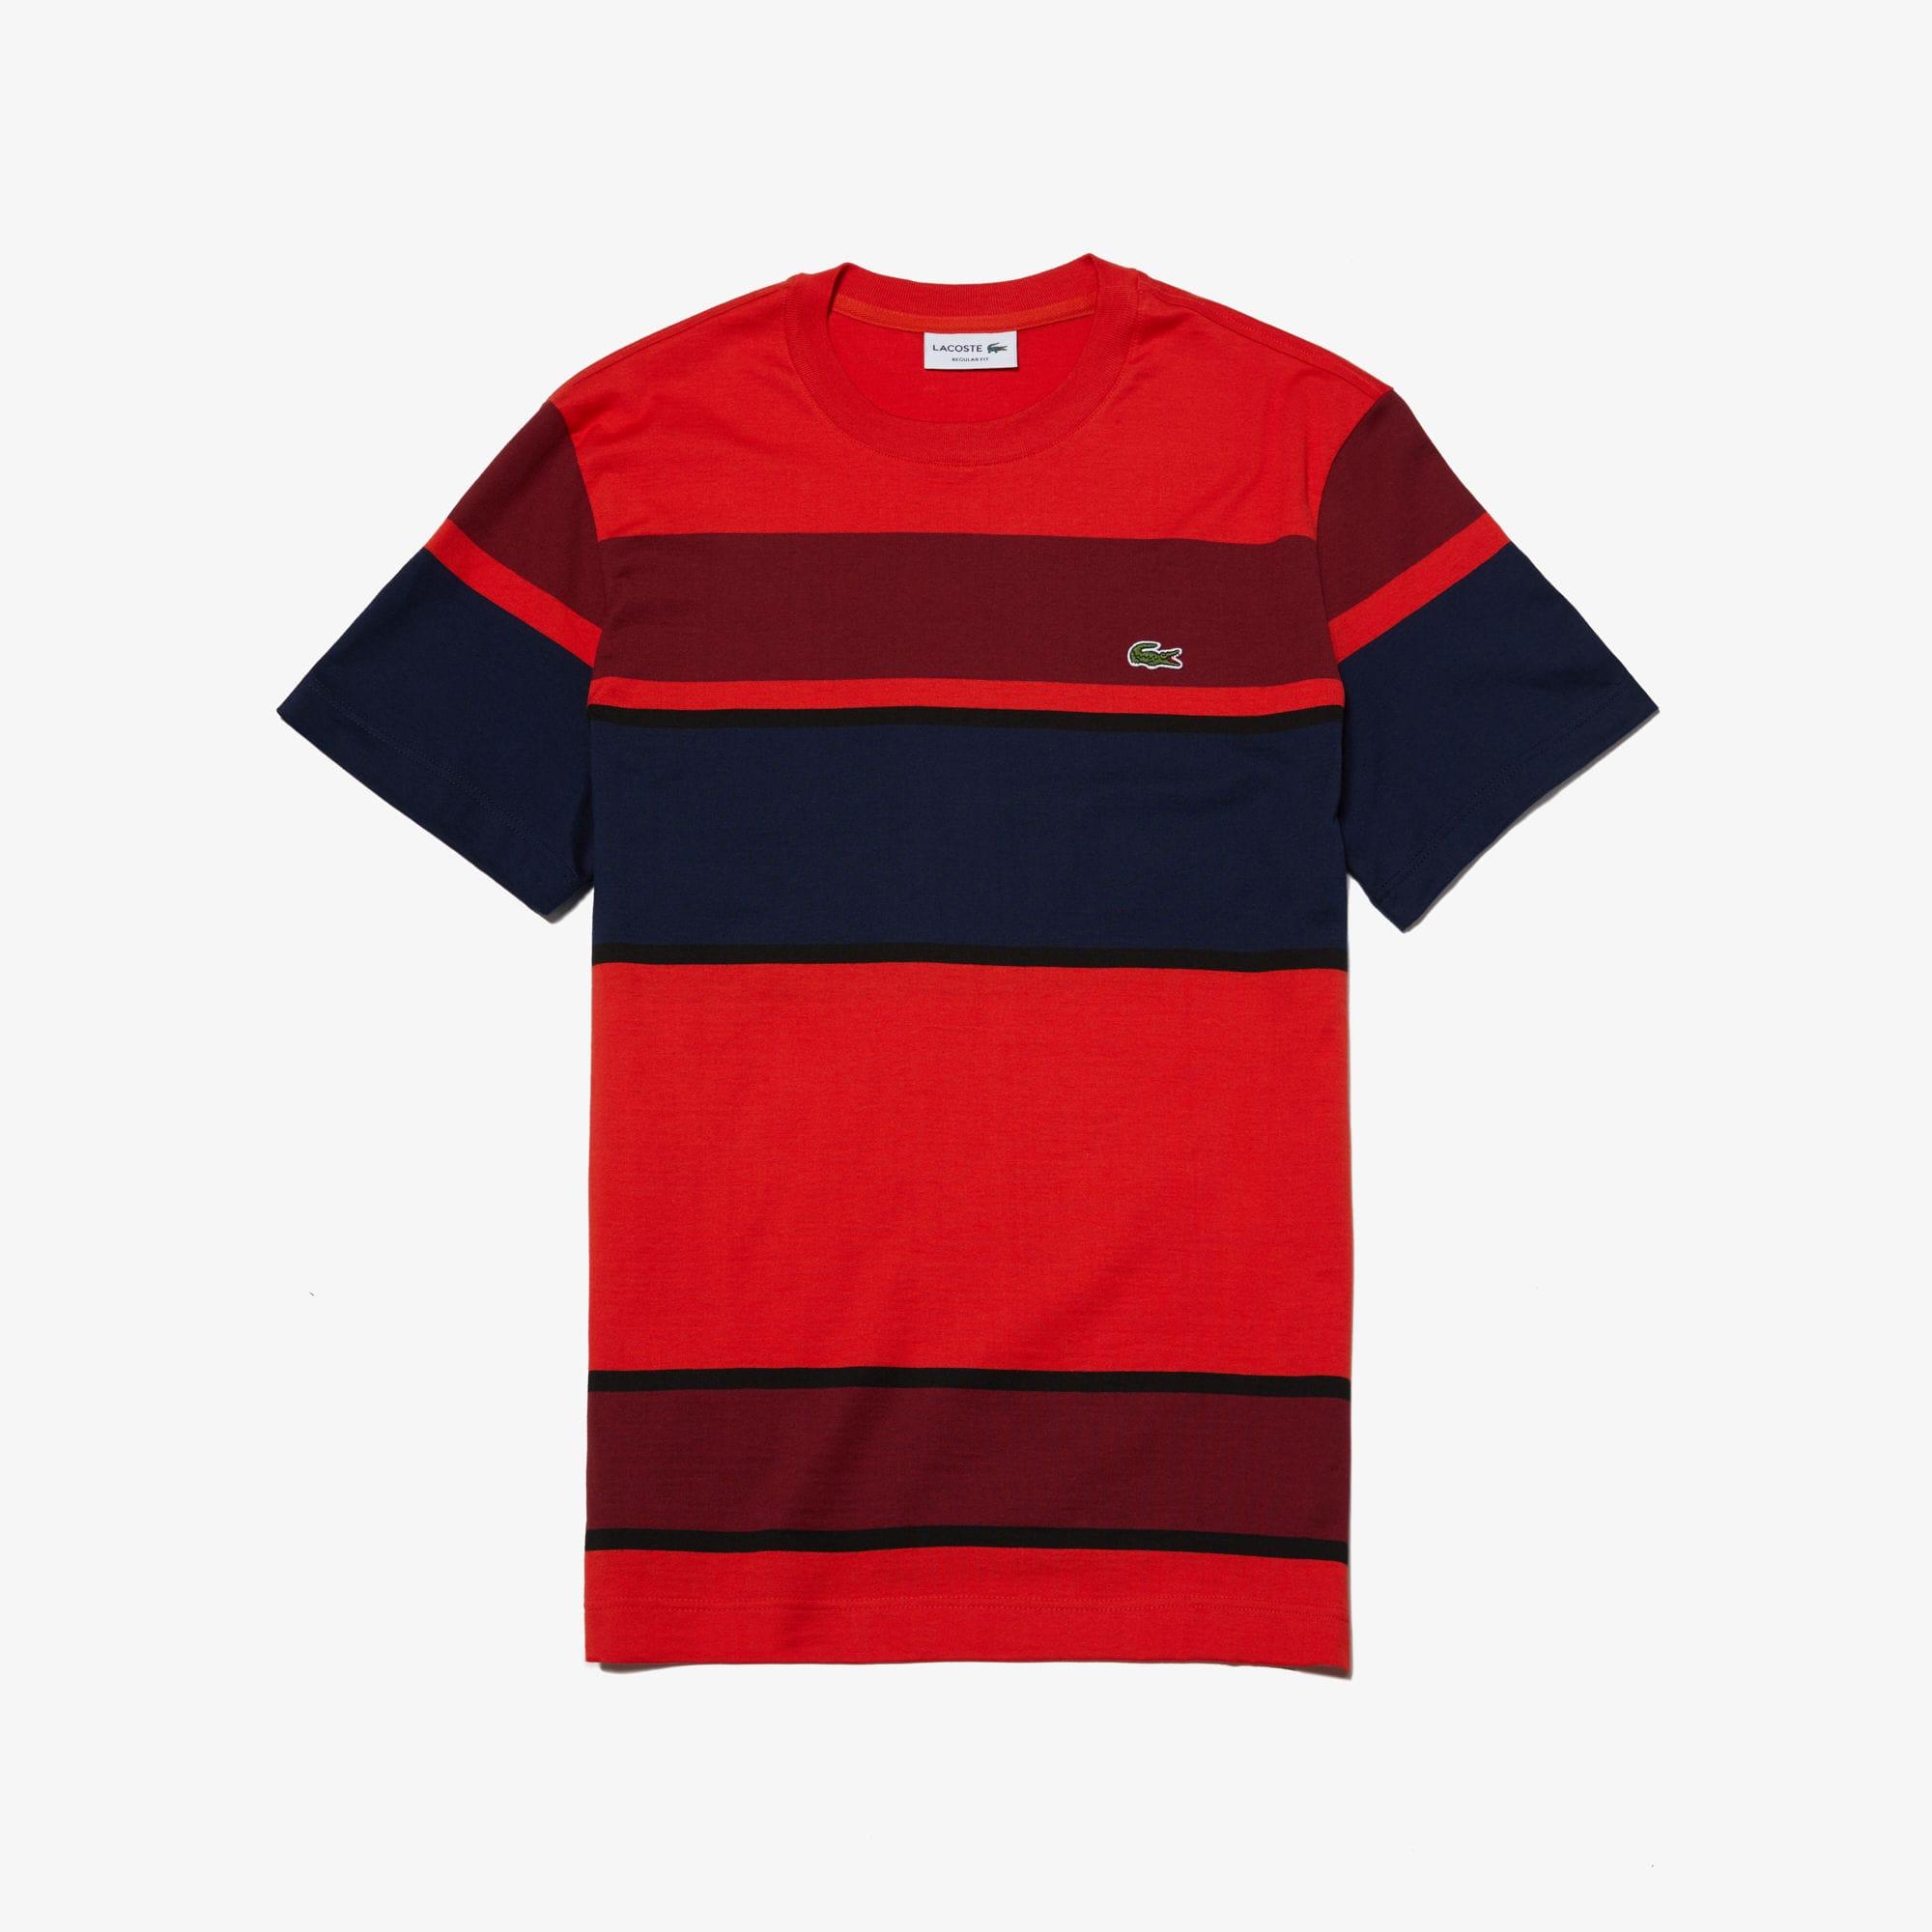 Lacoste Crew Neck Cotton T-shirt in Red,Black,Bordeaux,Navy Blue (Red ...